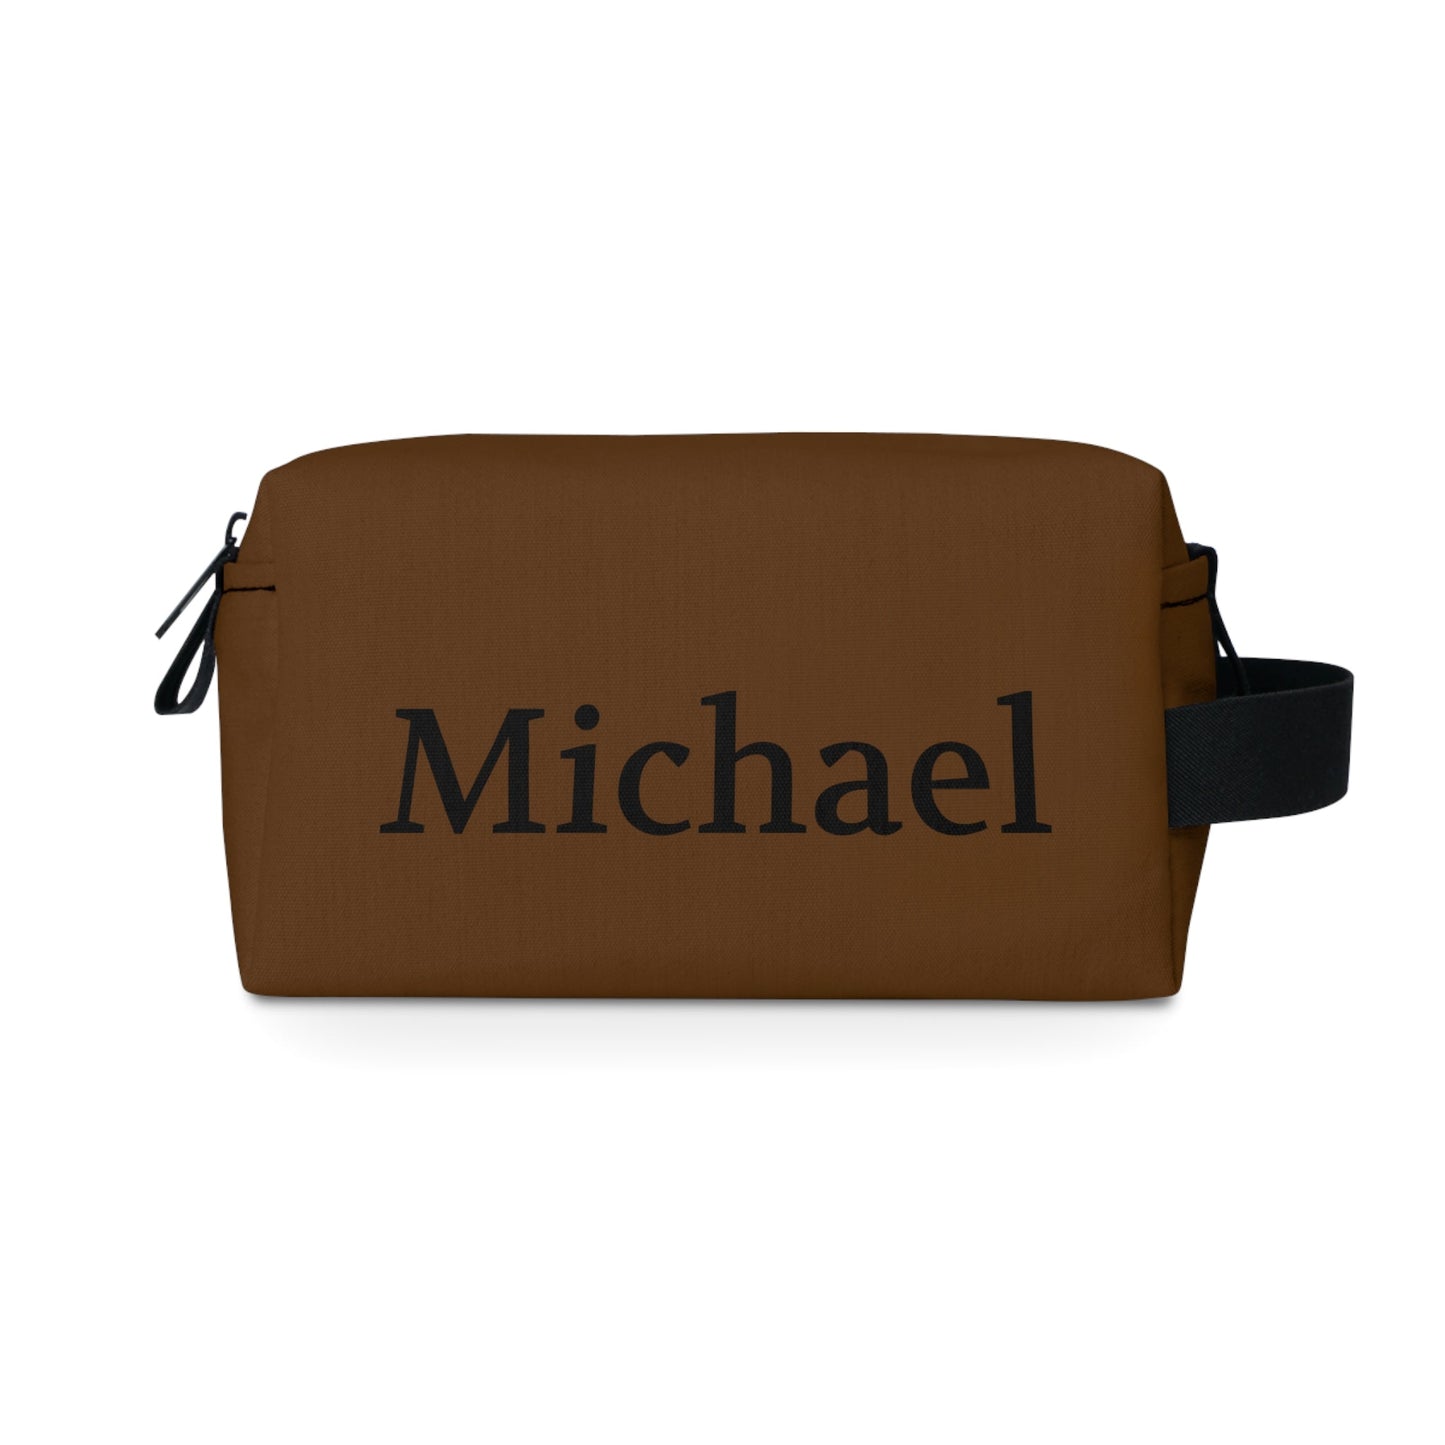 Get trendy with Personalized Toiletry Bag - Bags available at Good Gift Company. Grab yours for $19.75 today!